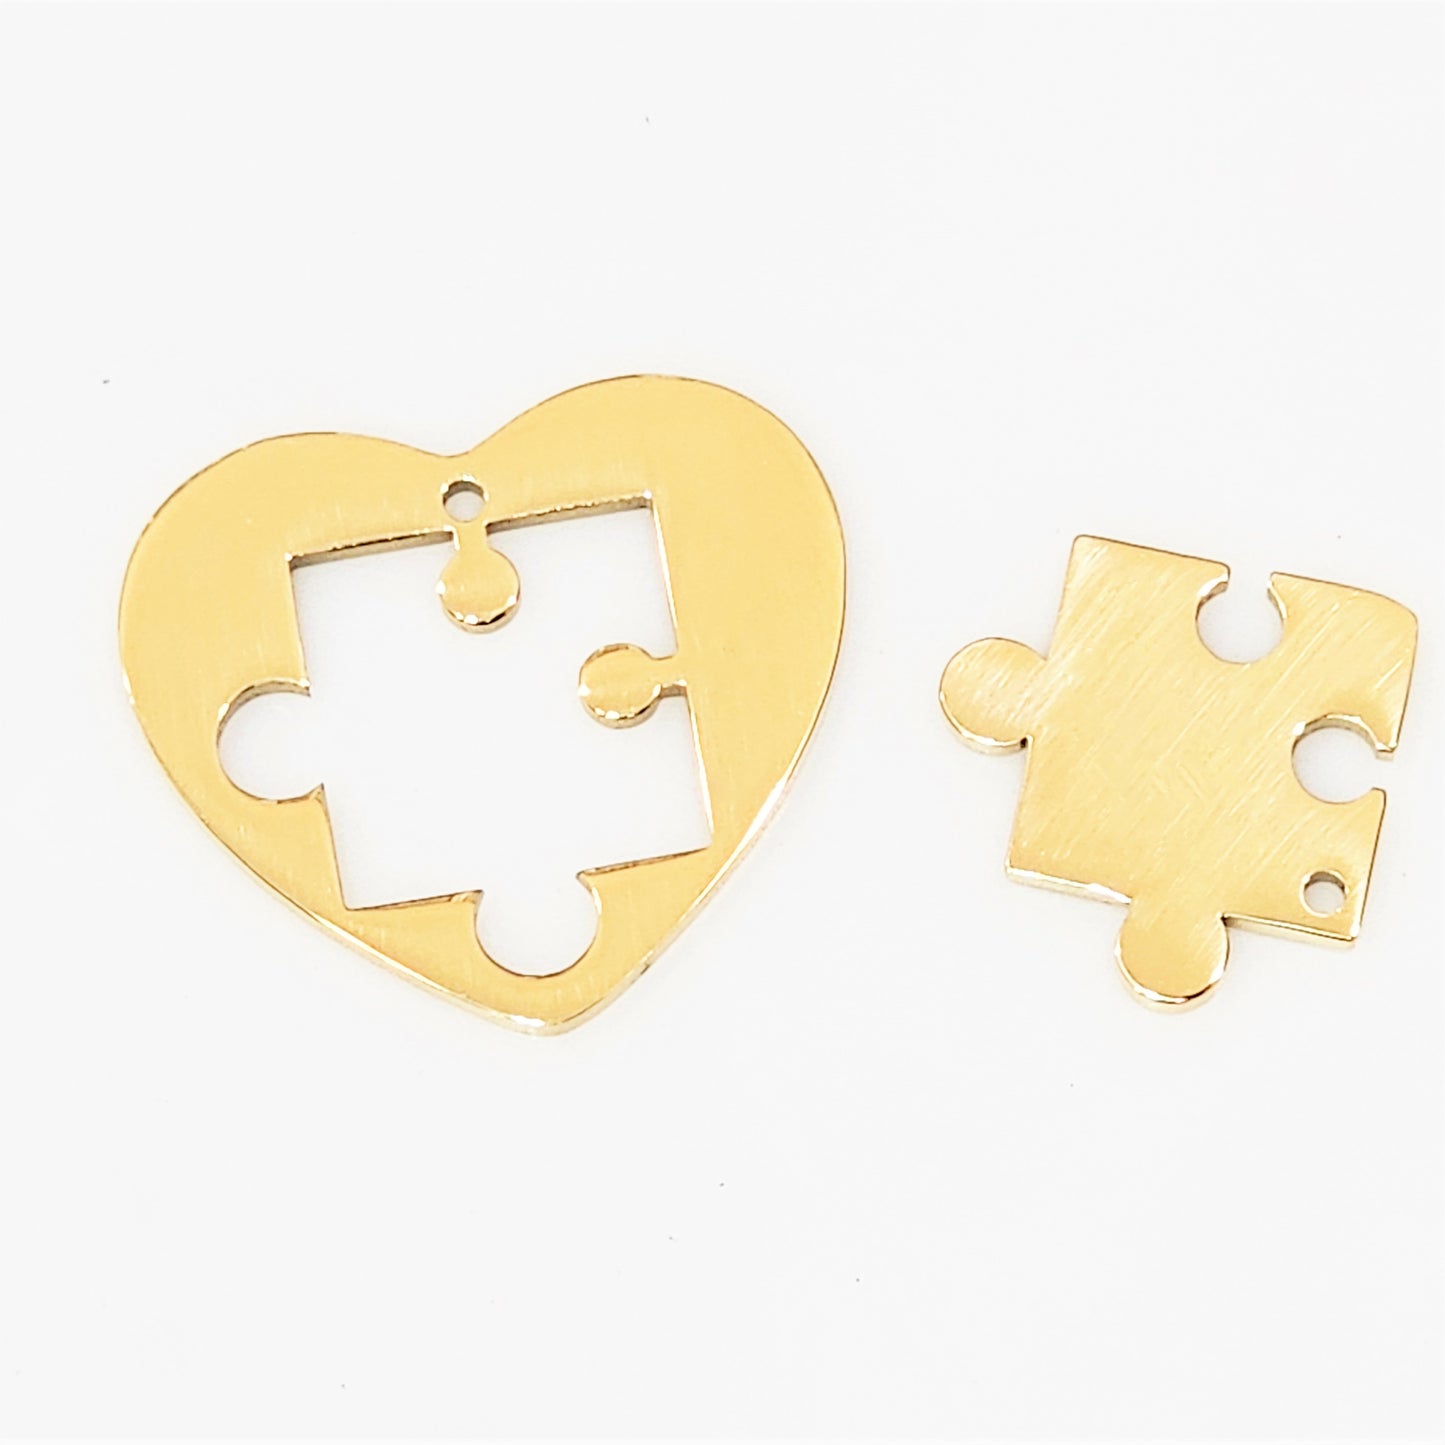 Heart & Puzzle Piece - Gold Plated